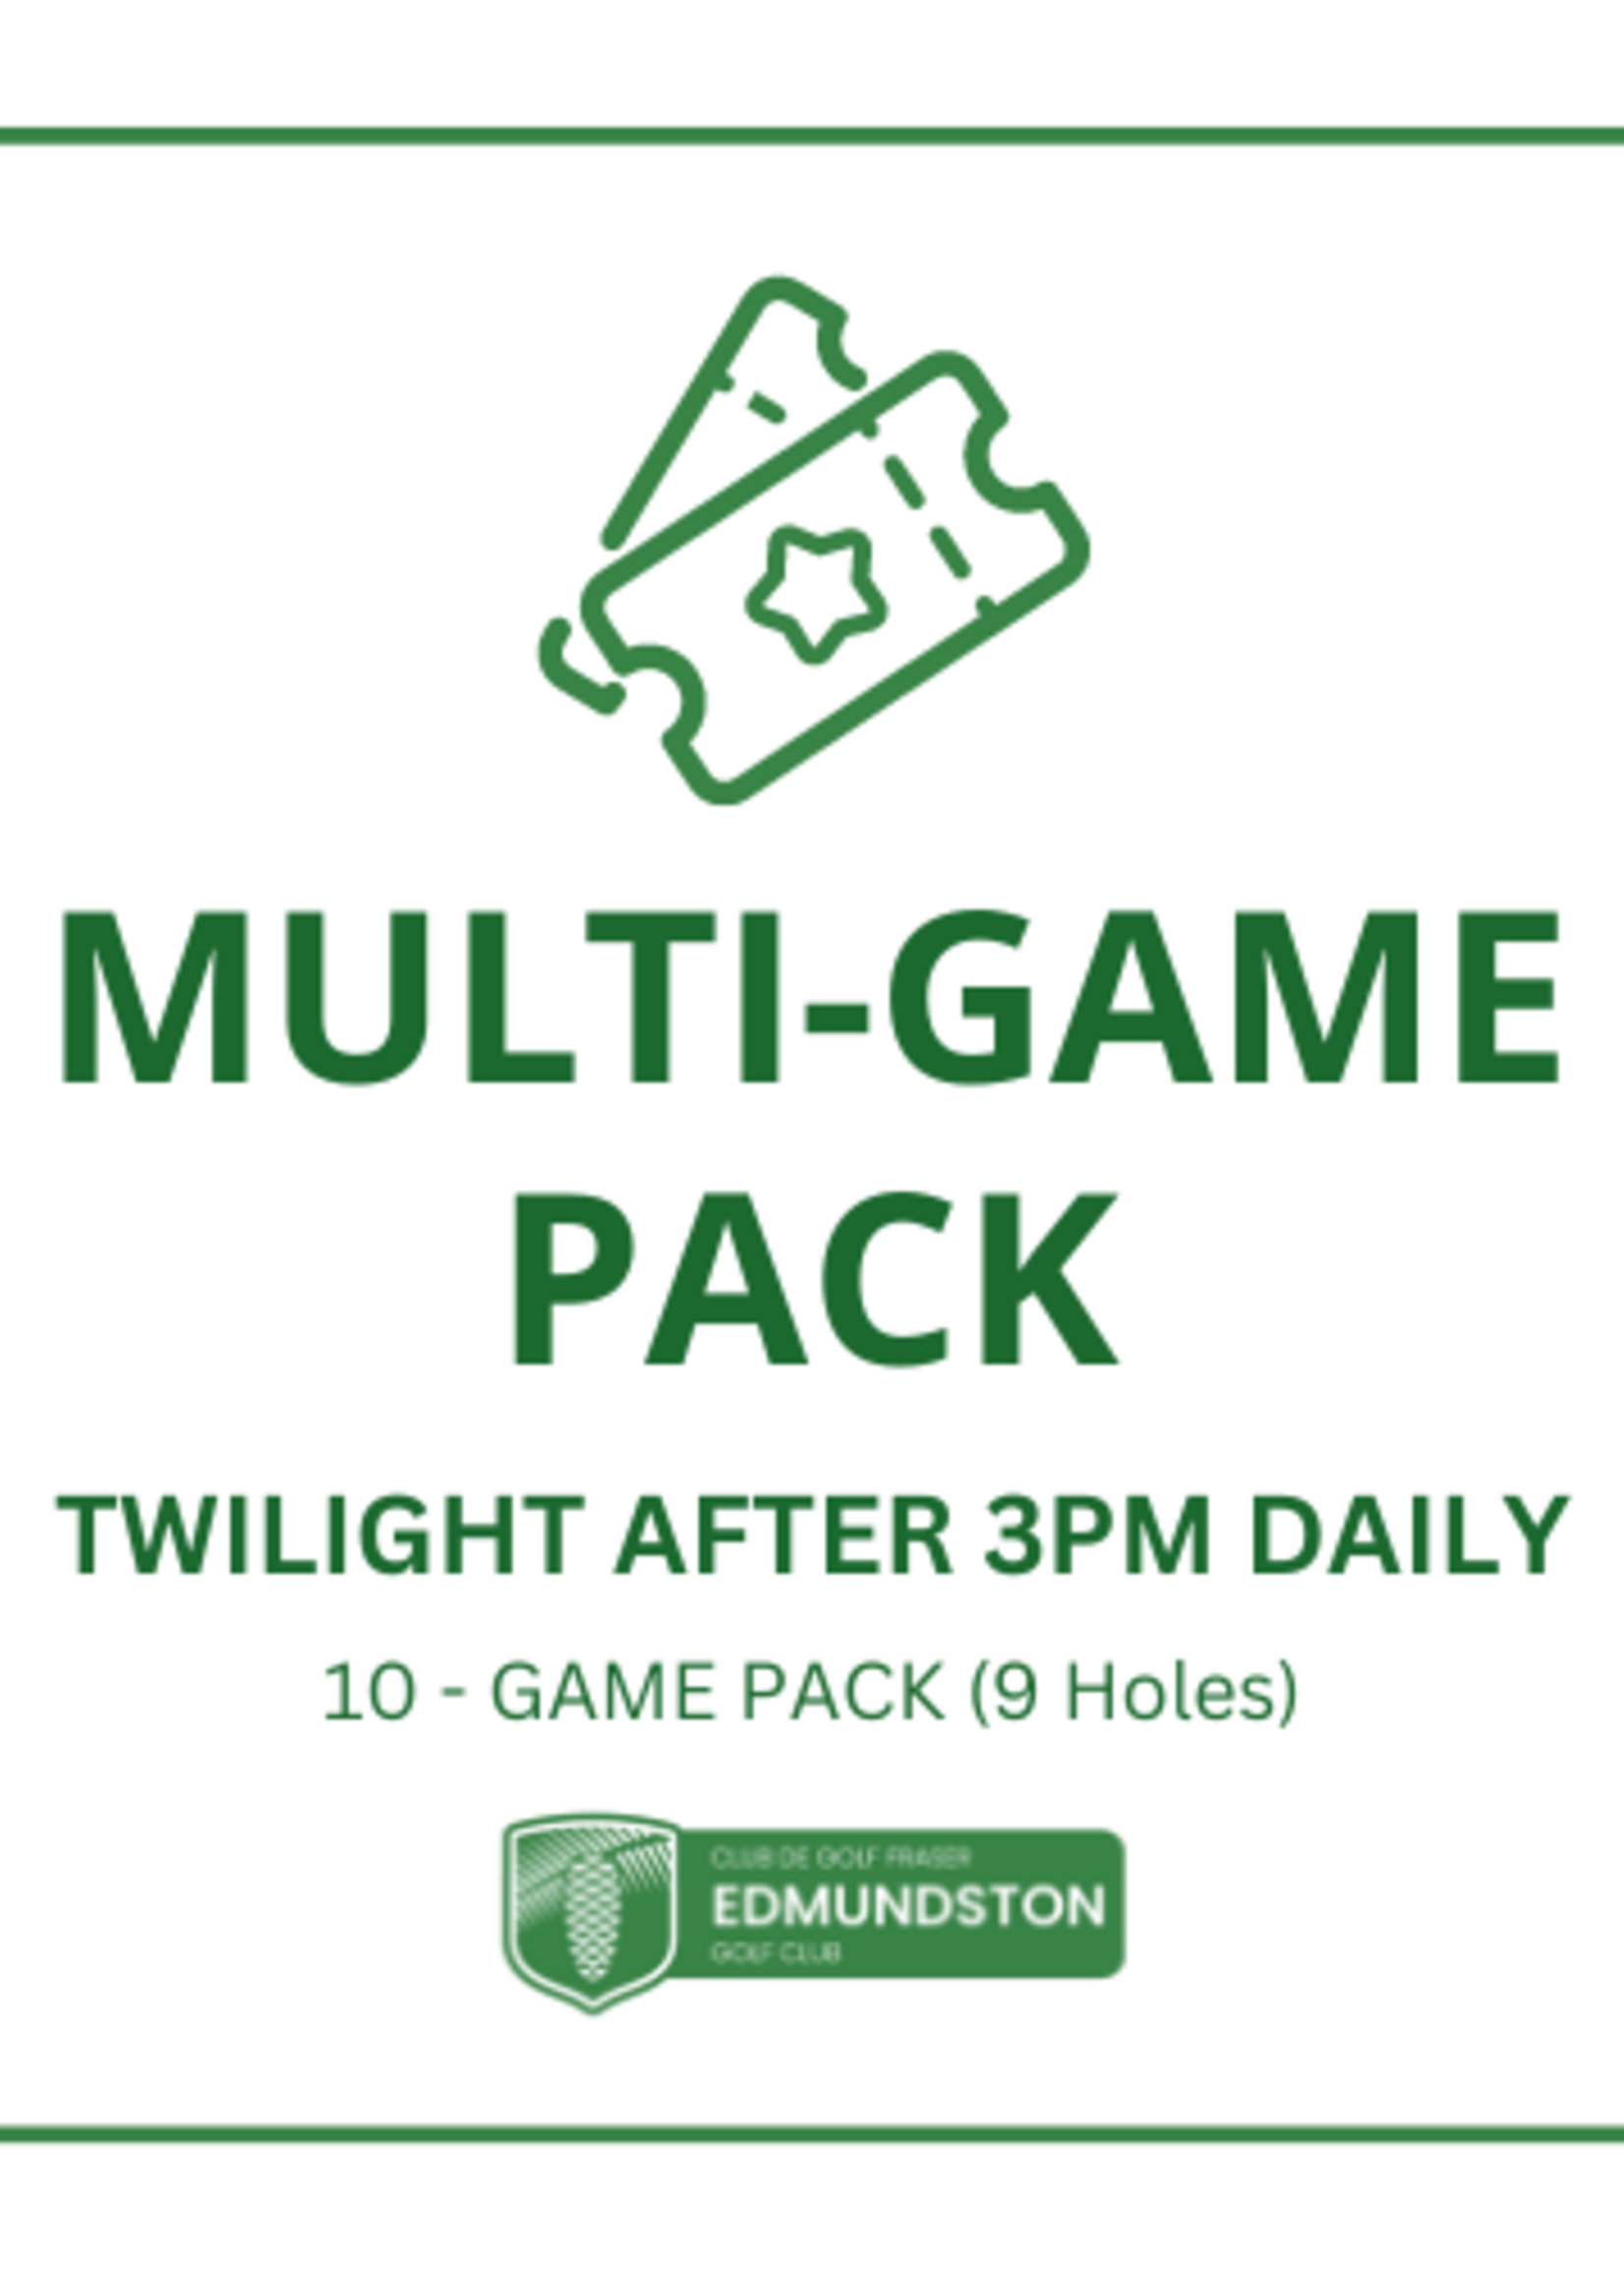 10-GAME PACK TWILIGHT AFTER 3PM (9 HOLES) - 10-GAME PACK TWILIGHT AFTER 3PM (9 HOLES)